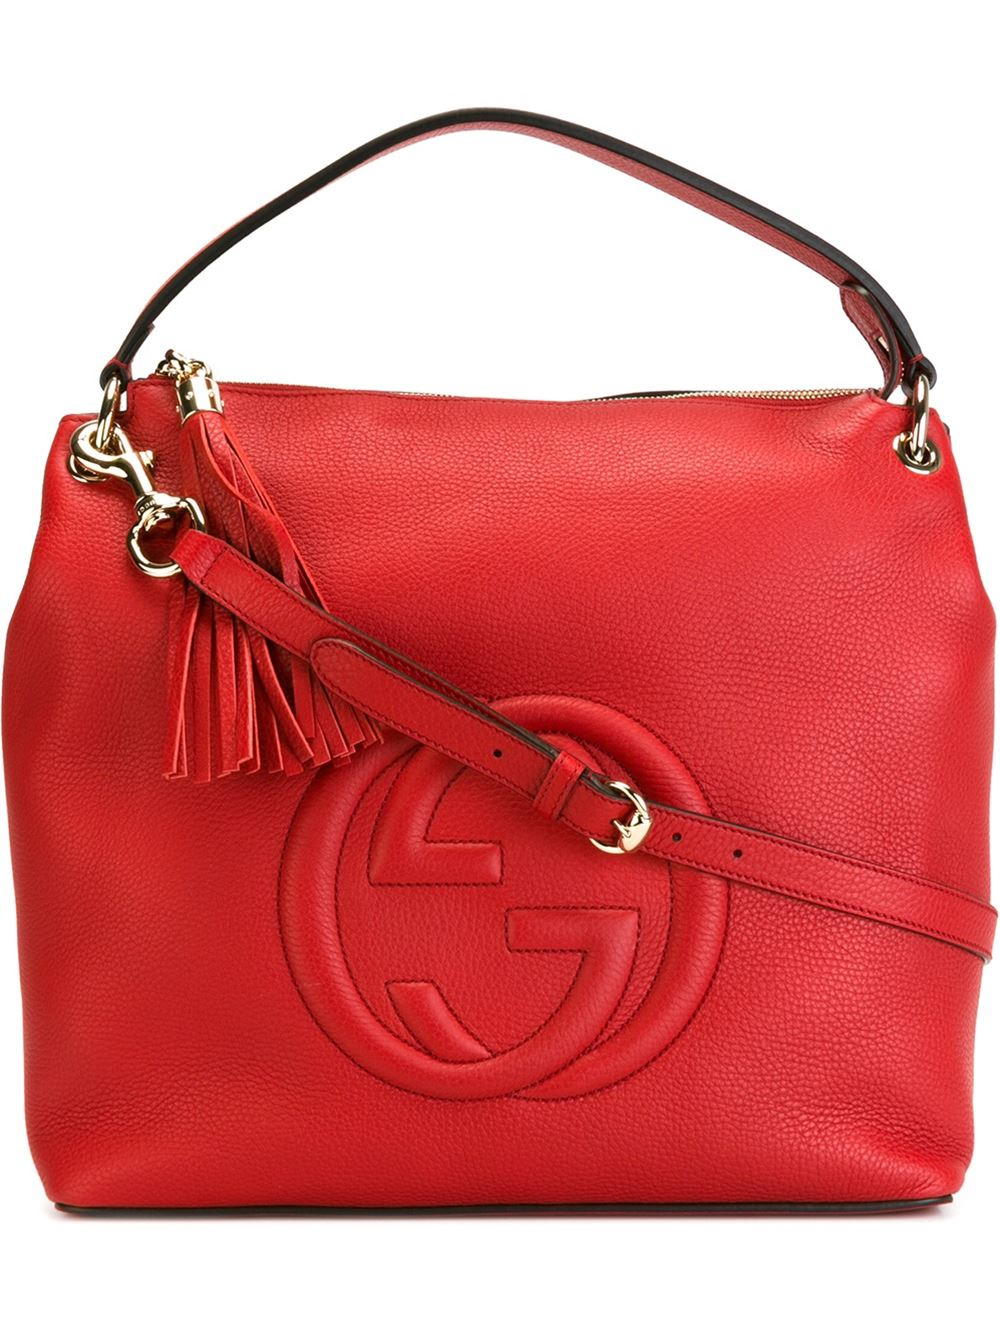 Gucci Soho Bag in Red - Lyst